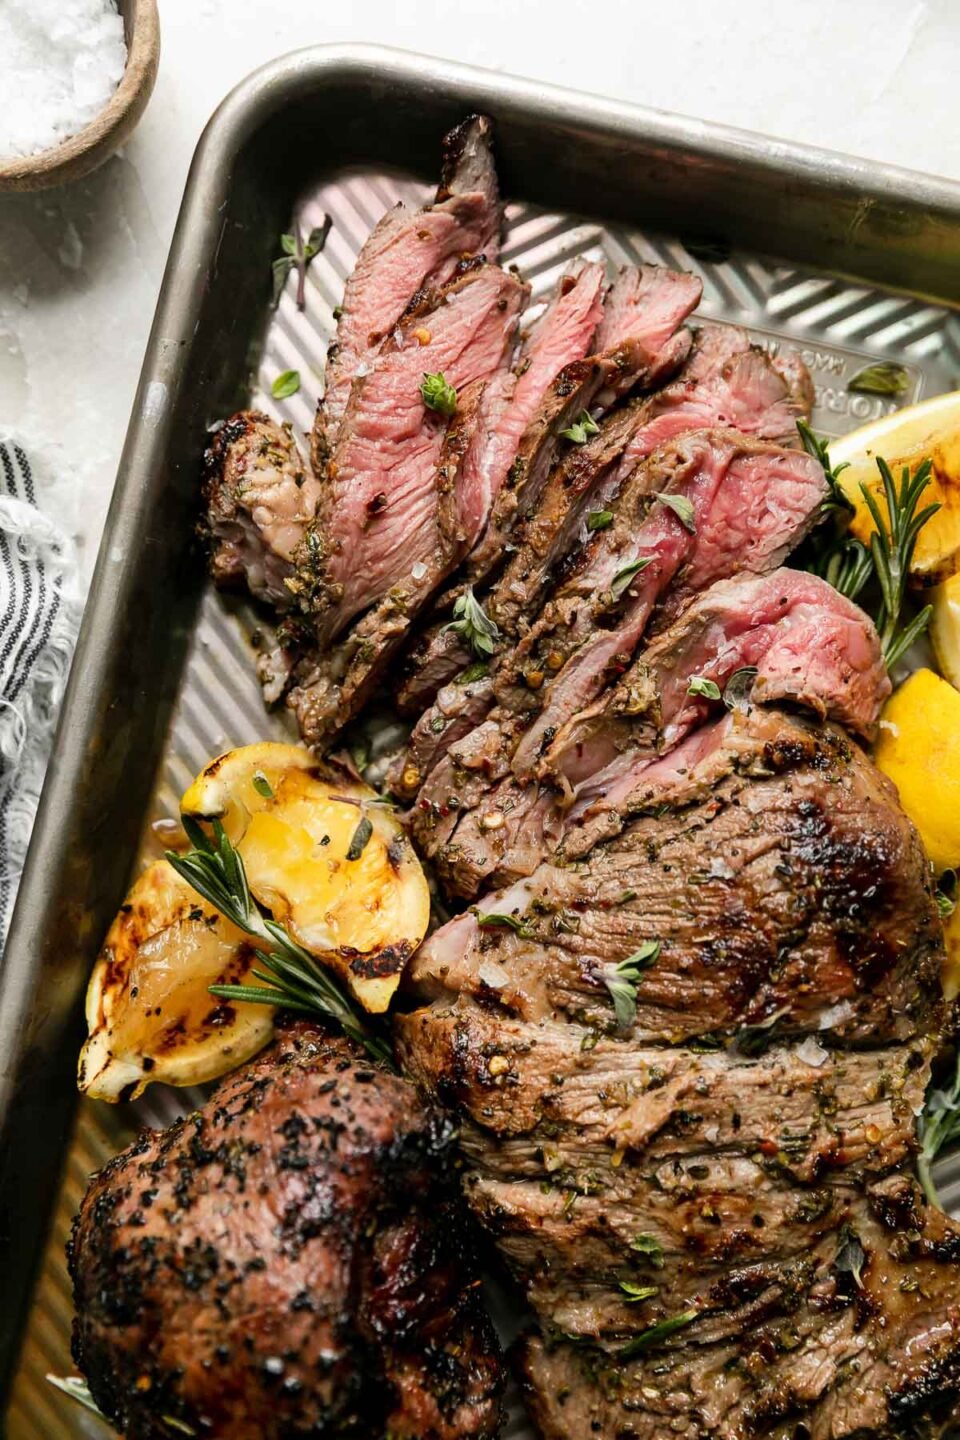 A partially carved grilled leg of lamb rests atop an aluminum baking sheet surrounded by grilled lemons and sprigs of rosemary. The baking sheet pan sits atop a creamy white textured surface with a blue and white striped linen napkin and a small wooden pinch bowl filled with kosher salt resting alongside.